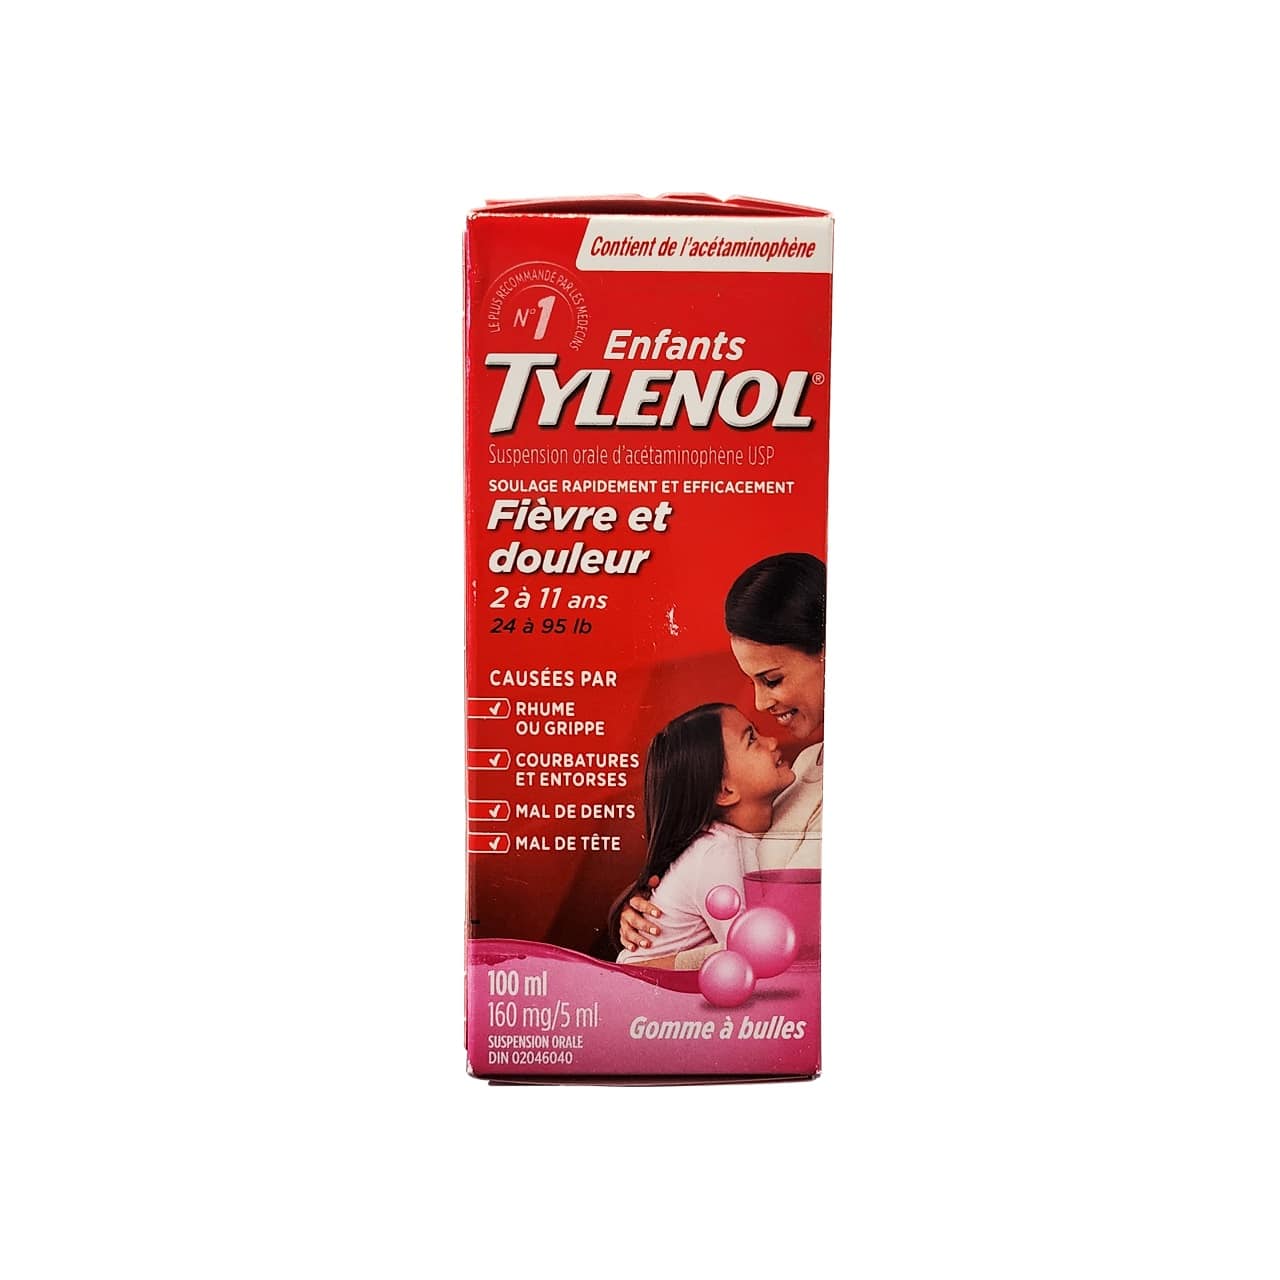 Product label for Children's Tylenol Acetaminophen Fever and Pain Bubble Gum Flavour (Ages 2-11) (100 mL) in French